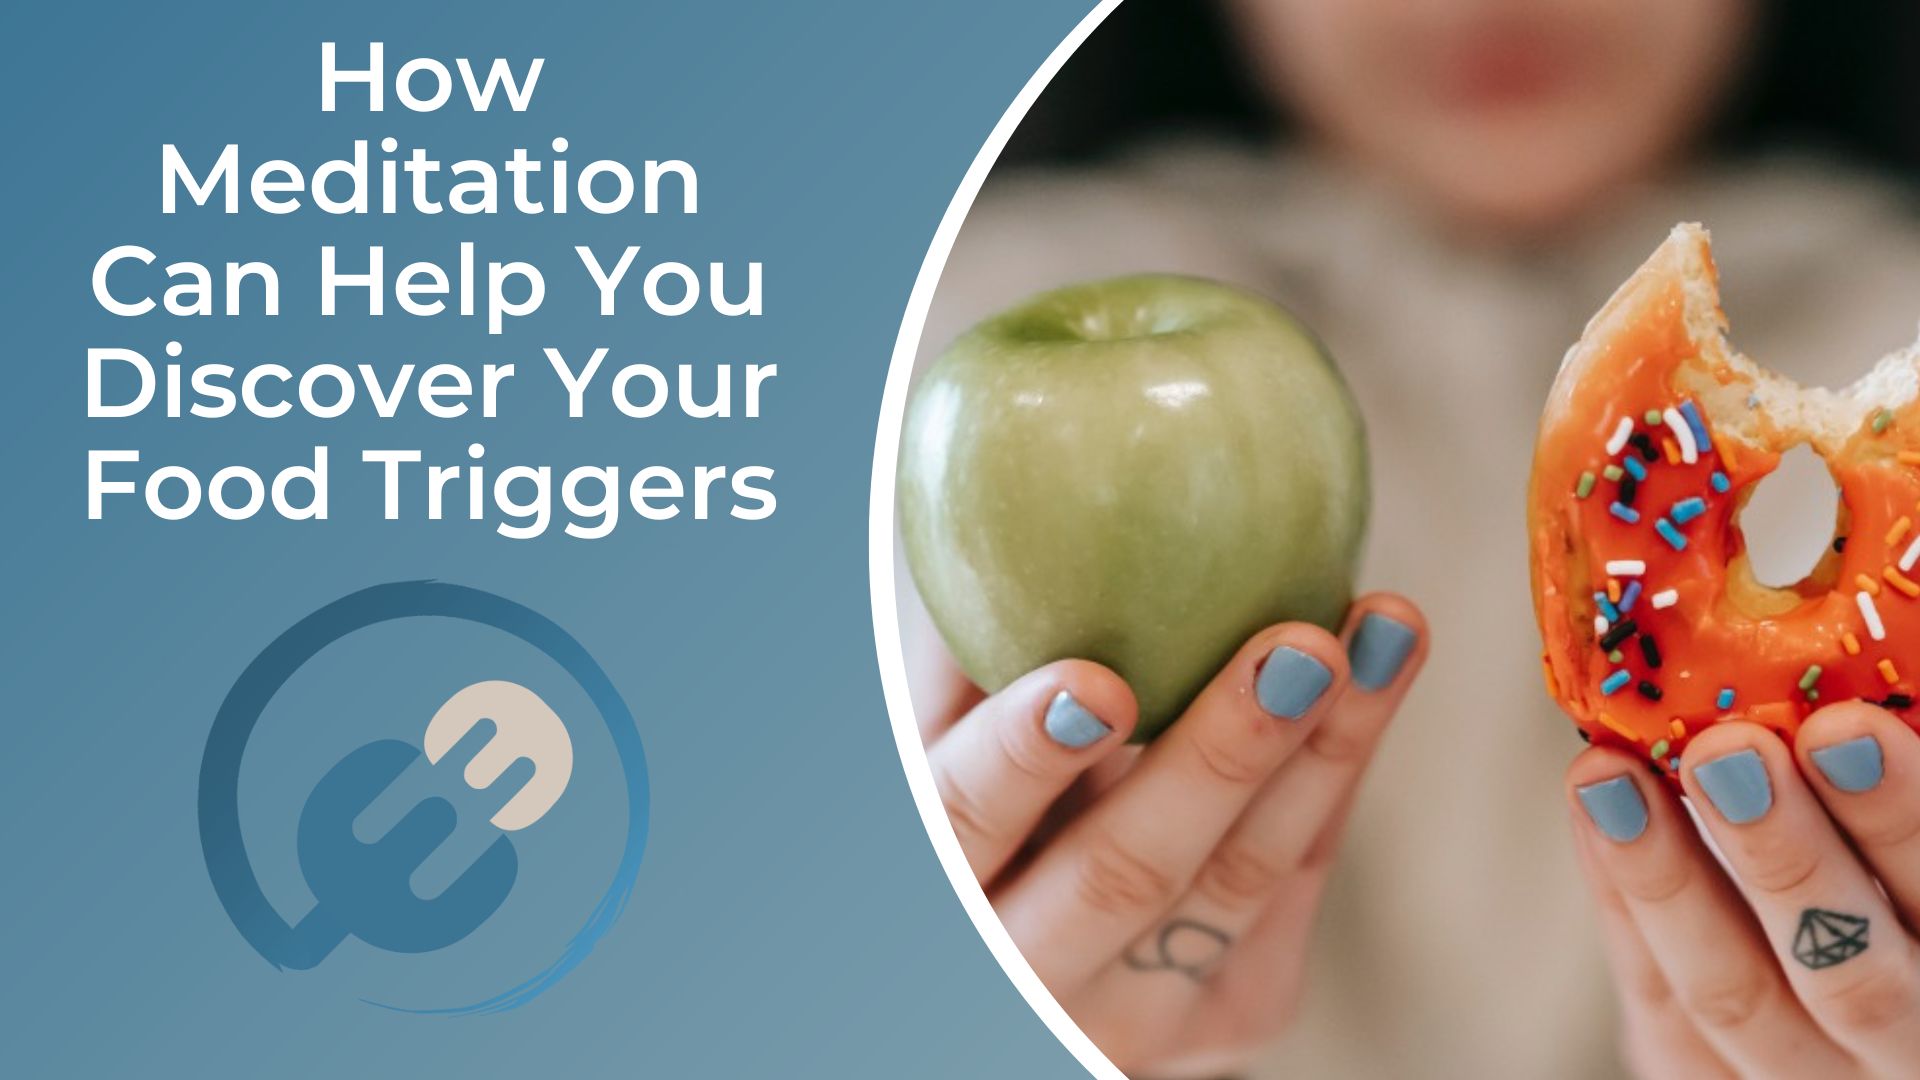 How Meditation Can Help You Discover Your Food Triggers